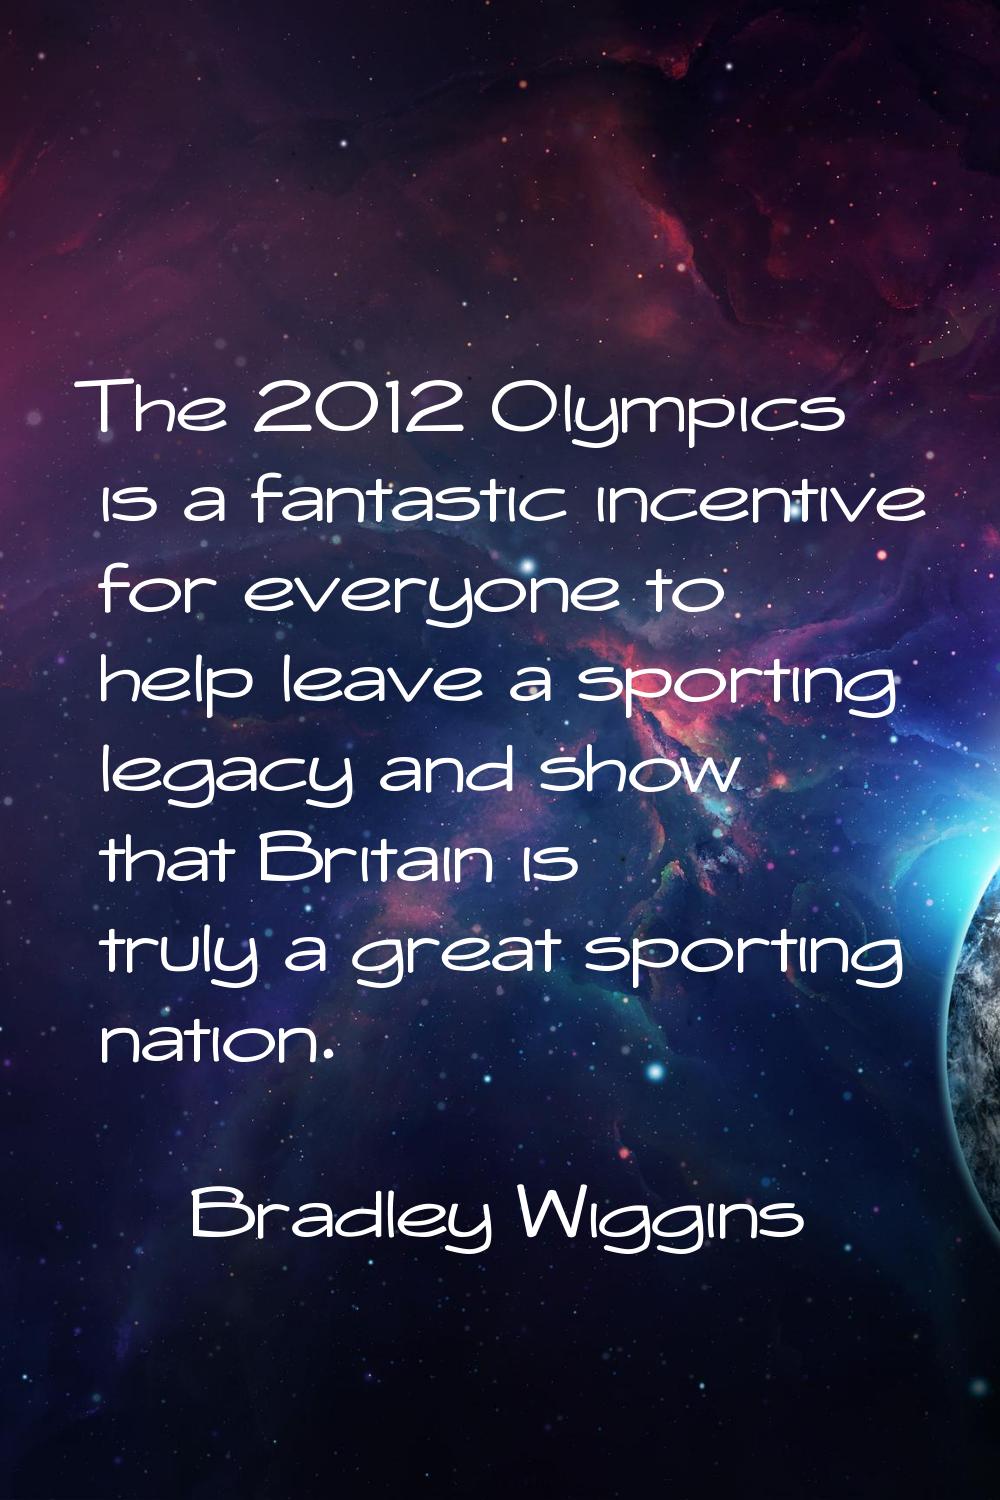 The 2012 Olympics is a fantastic incentive for everyone to help leave a sporting legacy and show th